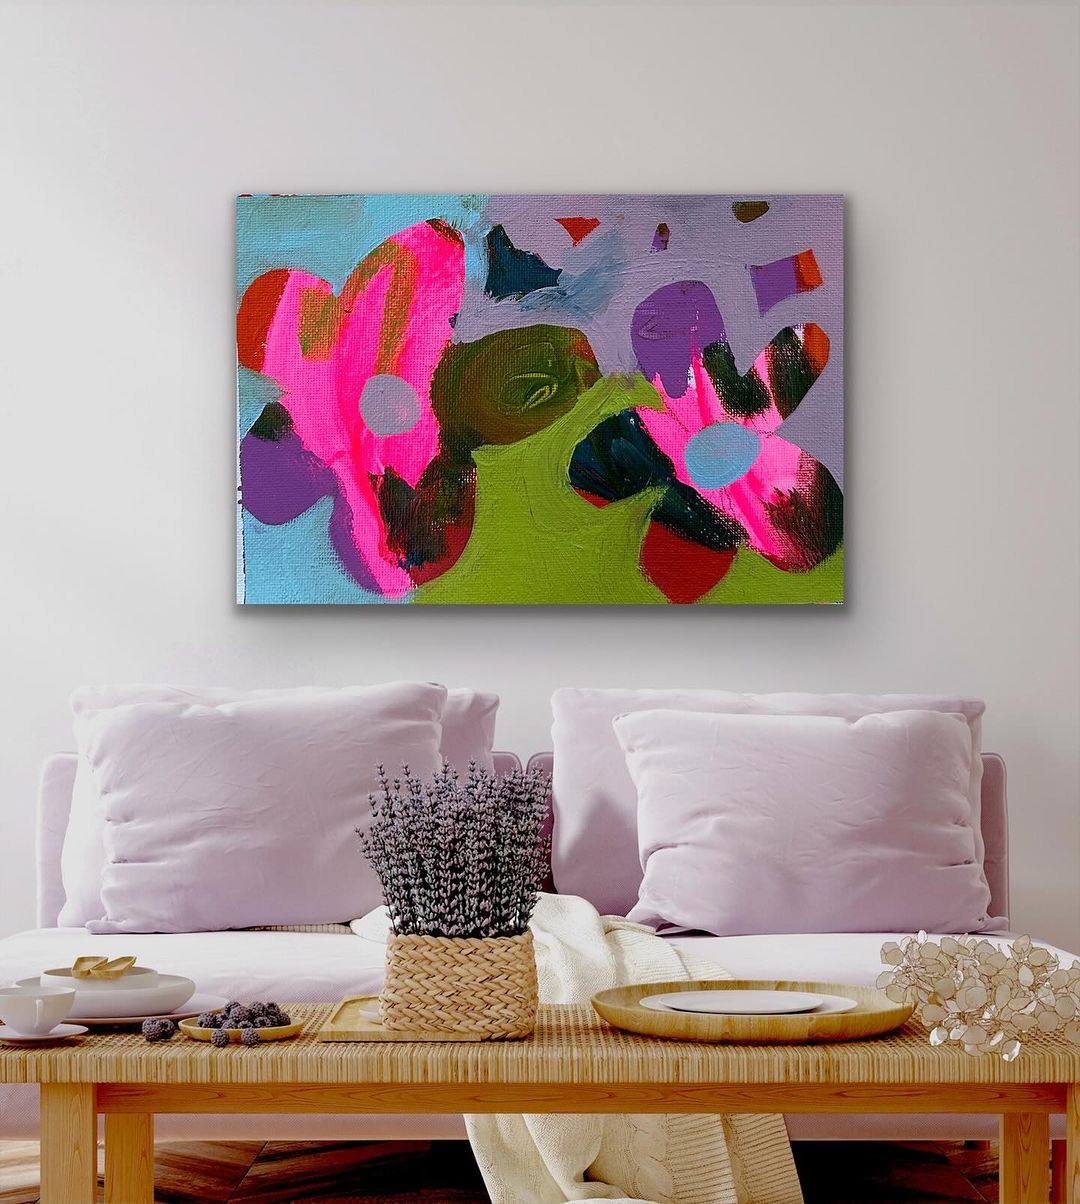 Bright flower painting on canvas hanging above couch